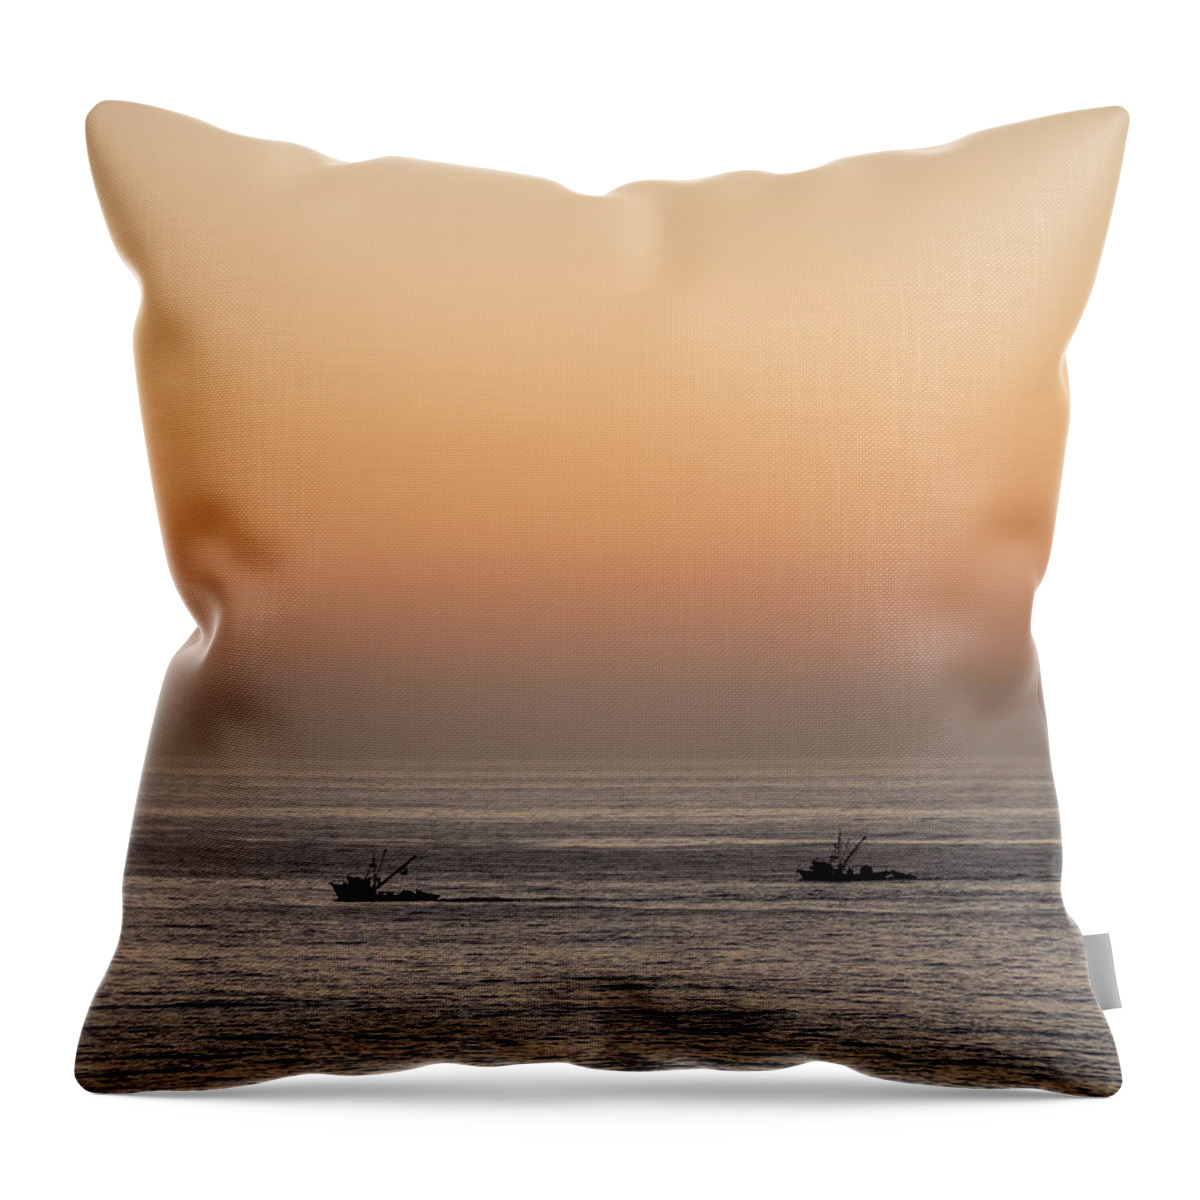 Fishing Throw Pillow featuring the photograph Fishing For A Sunset by Derek Dean